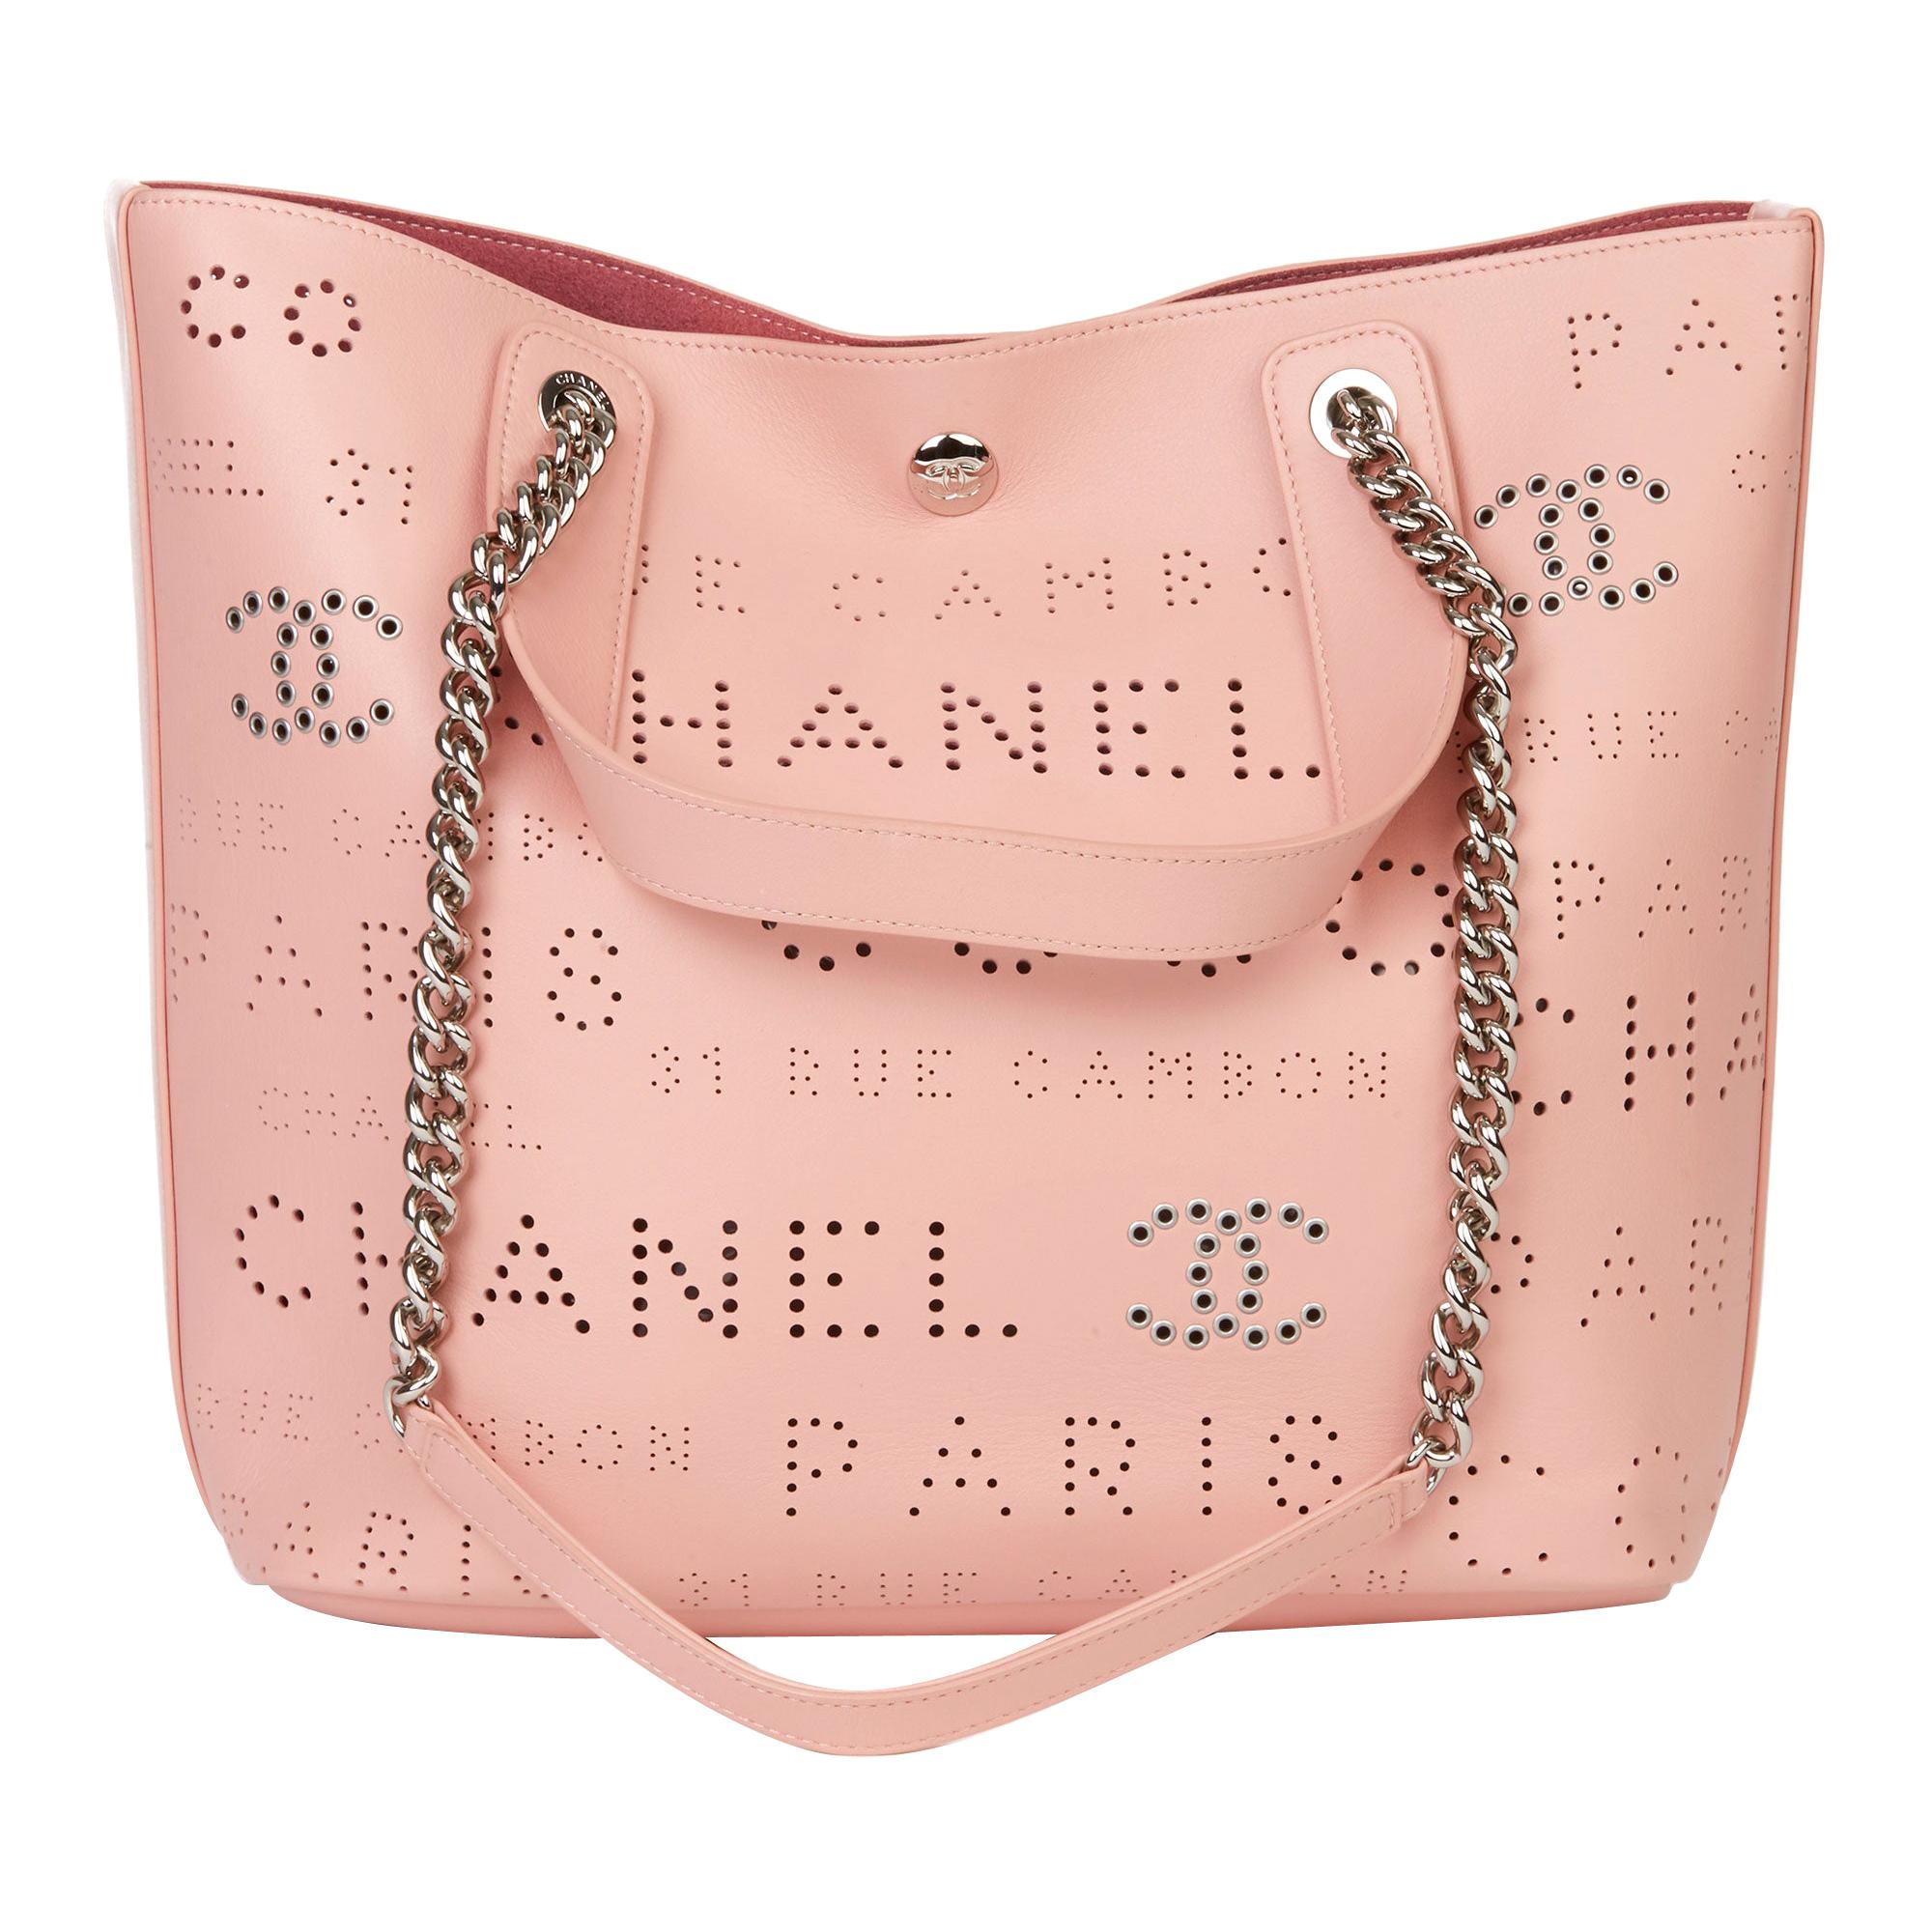 2019 Chanel Pink Calfskin Leather Logo Eyelets Shopping Tote with Tweed Pouch